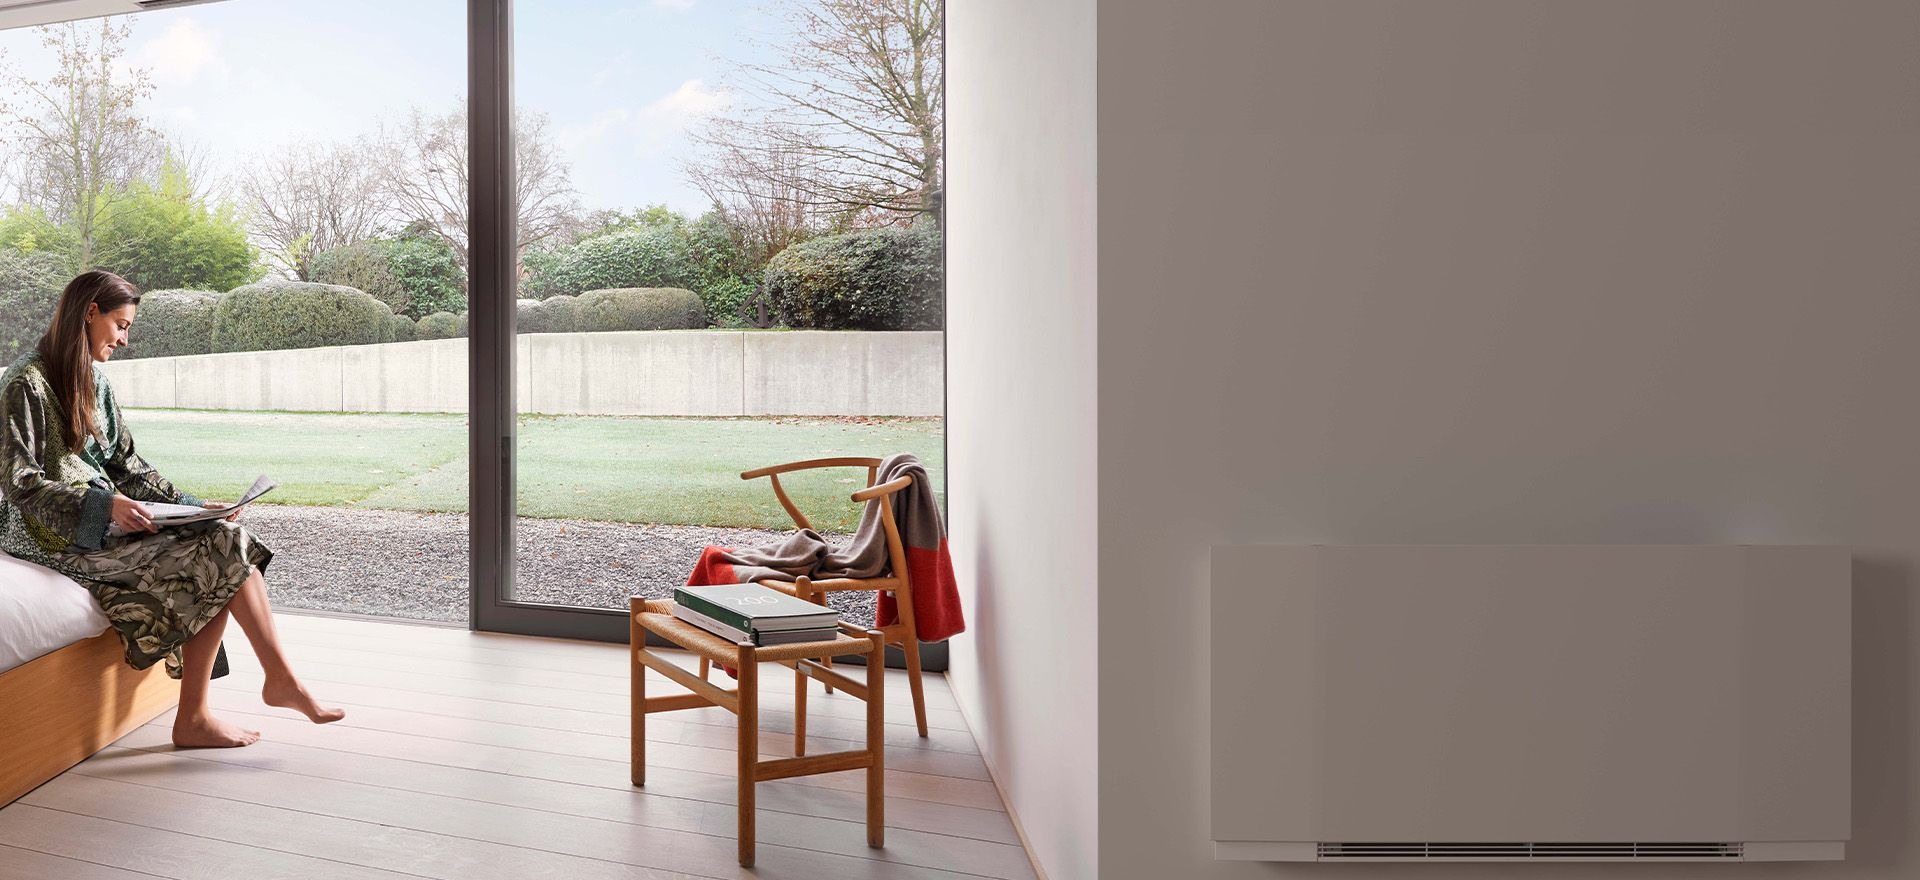 Changes in heat pump technology make sustainable heating and cooling systems more accessible for Kiwi homes